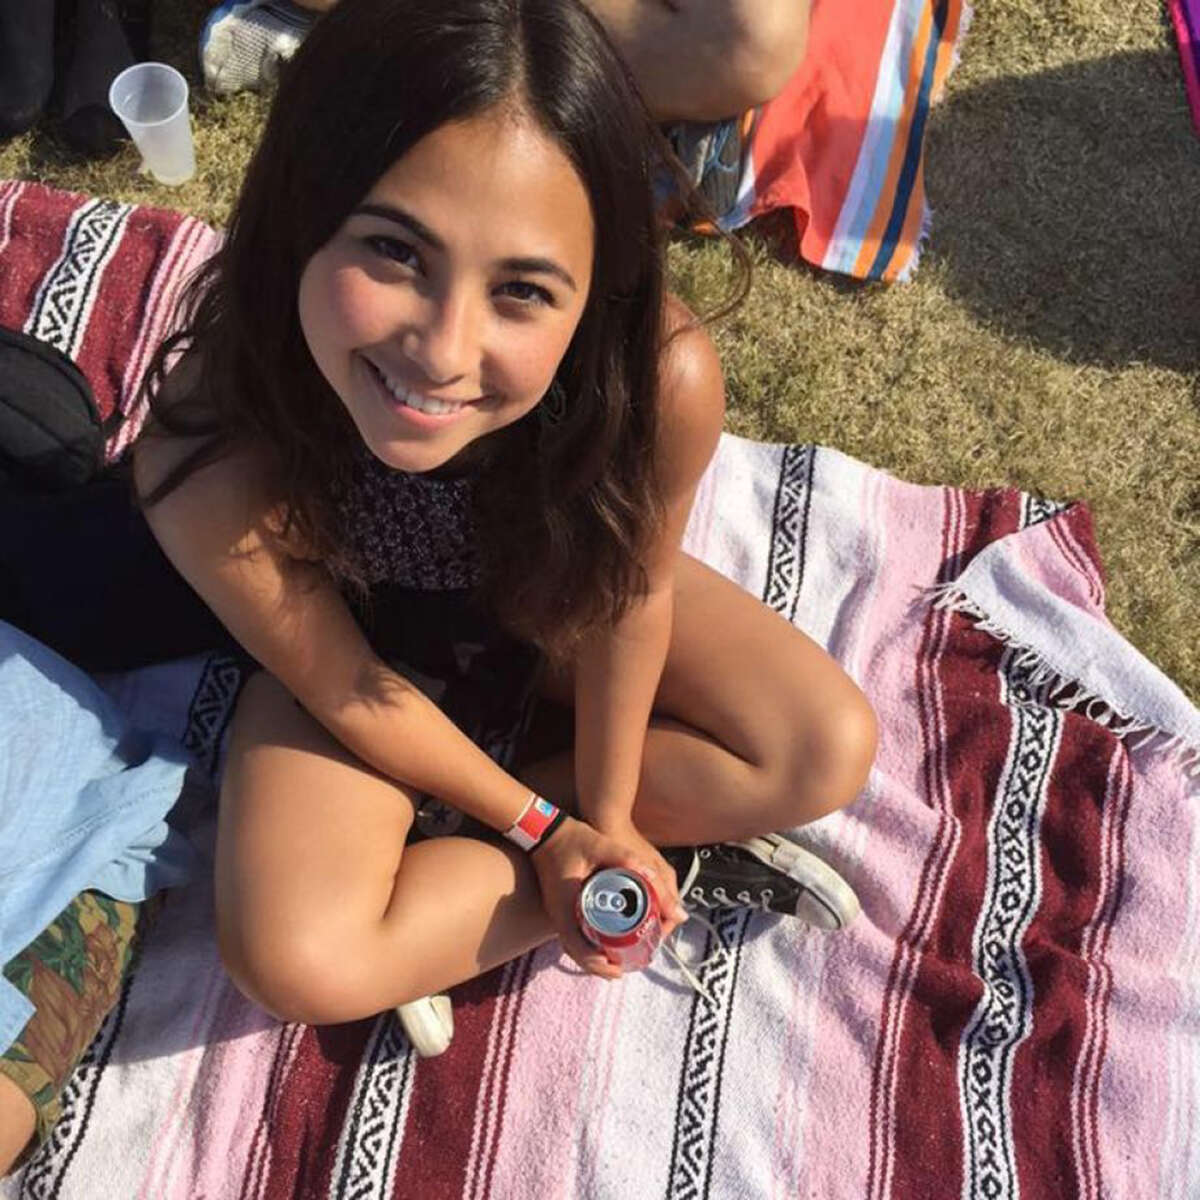 The murder of Haruka Weiser, 18, as she was returning to her University of Texas at Austin dorm, highlights the need for more mental health treatment options, not just in Austin, but in Bexar County. Her alleged killer was reportedly mentally ill.